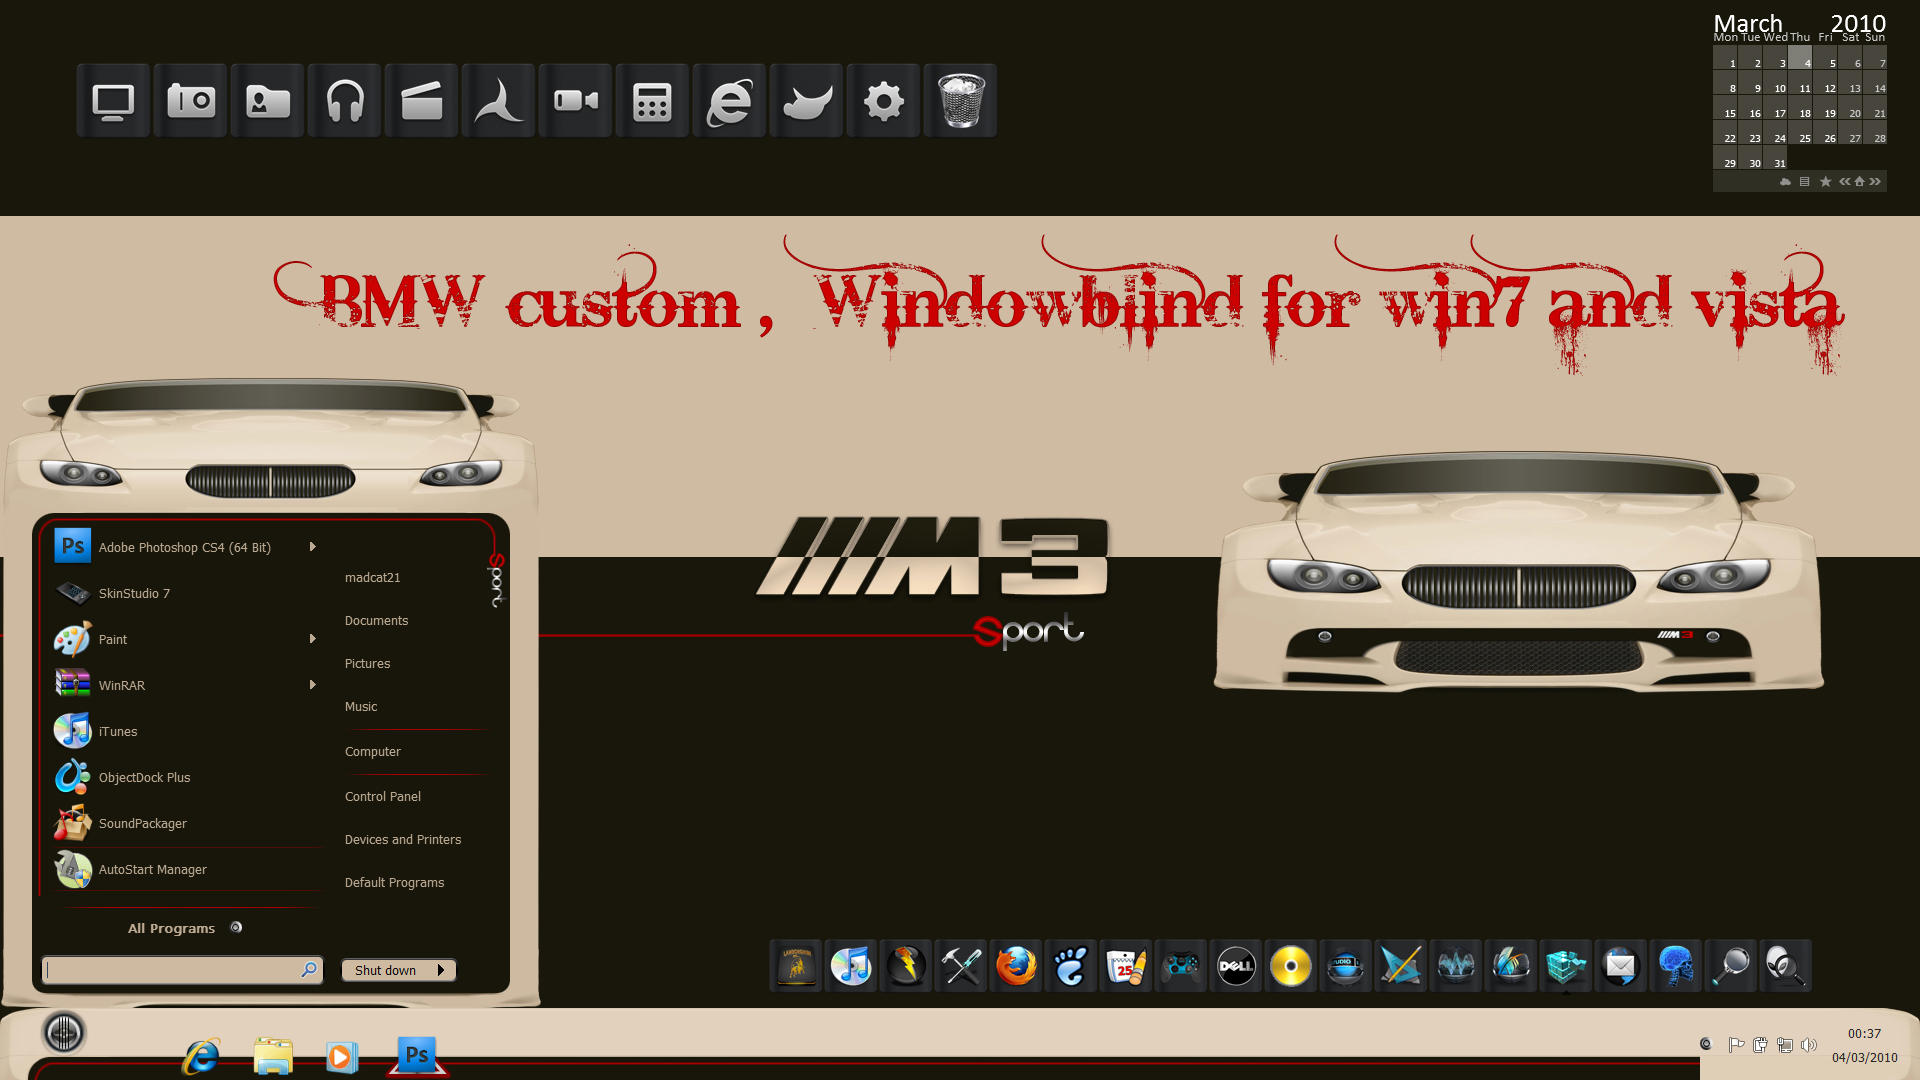 WINDOWBLINDS 7 DOWNLOAD - CUSTOMIZE THE LOOK AND FEEL OF WINDOWS